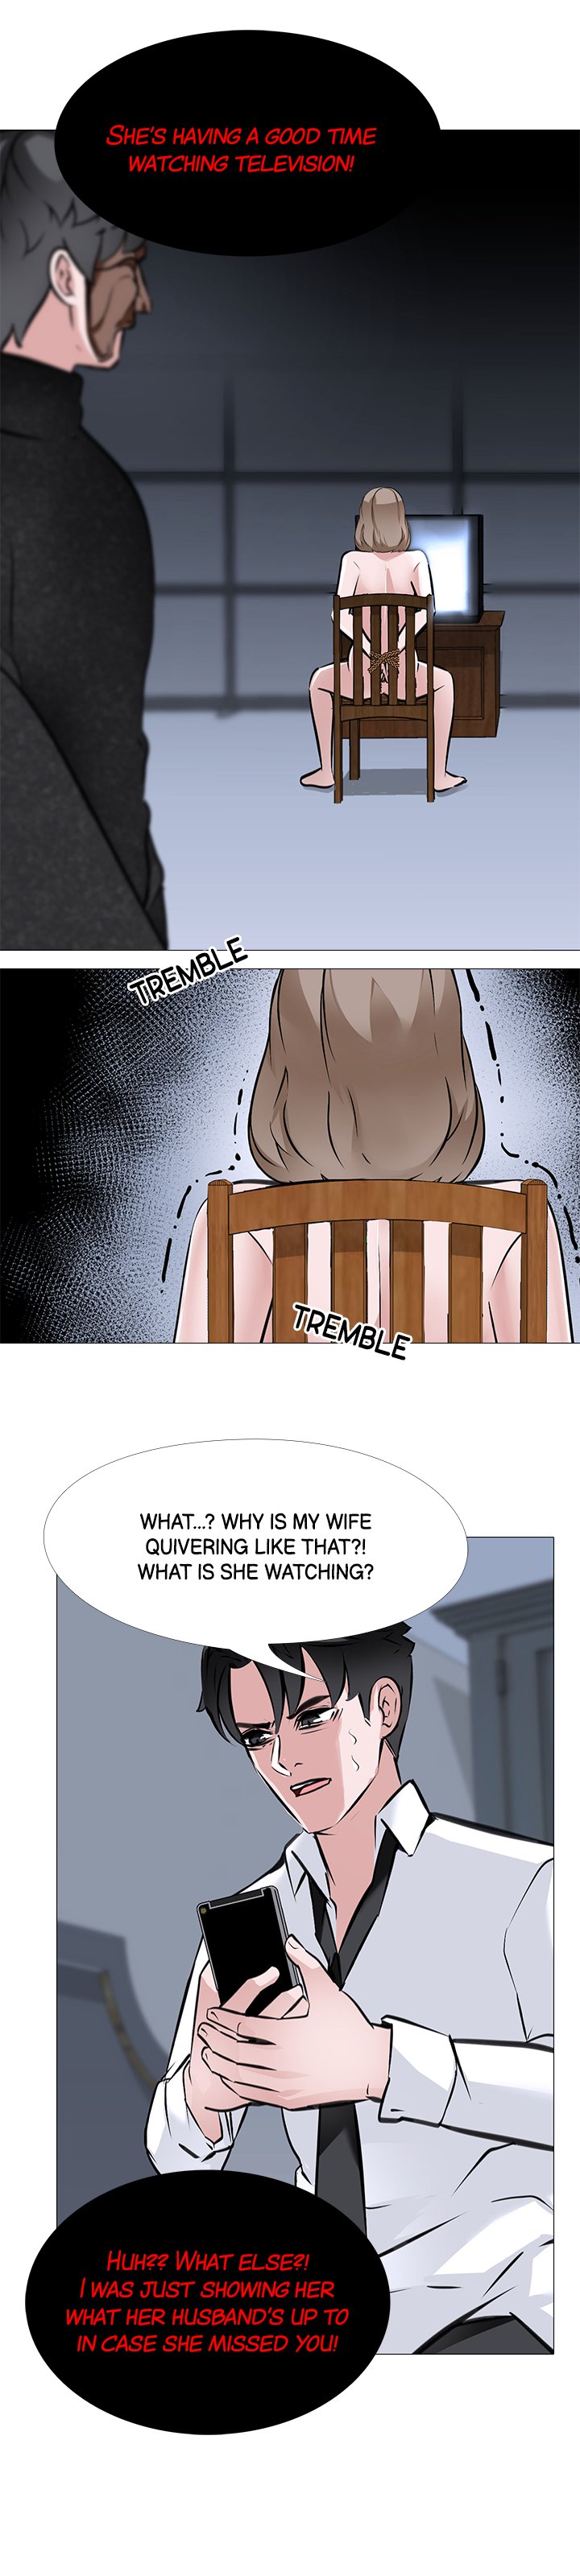 WIFE GAME Chapter 7 - Page 7